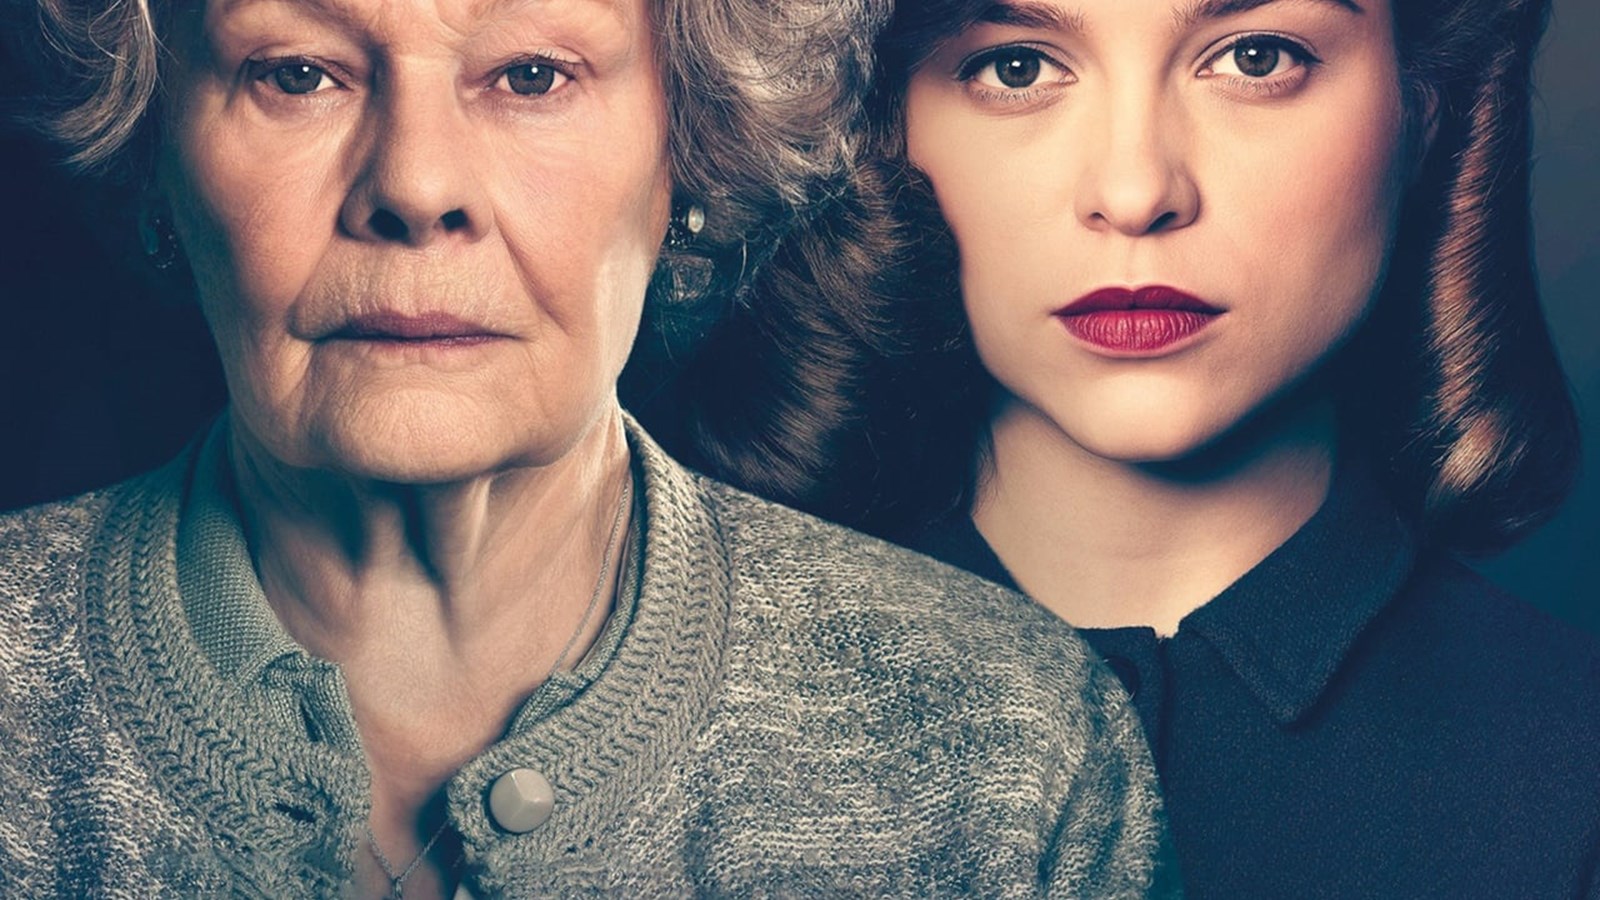 Film Review: Red Joan fails to ignite its potential - The AU Review